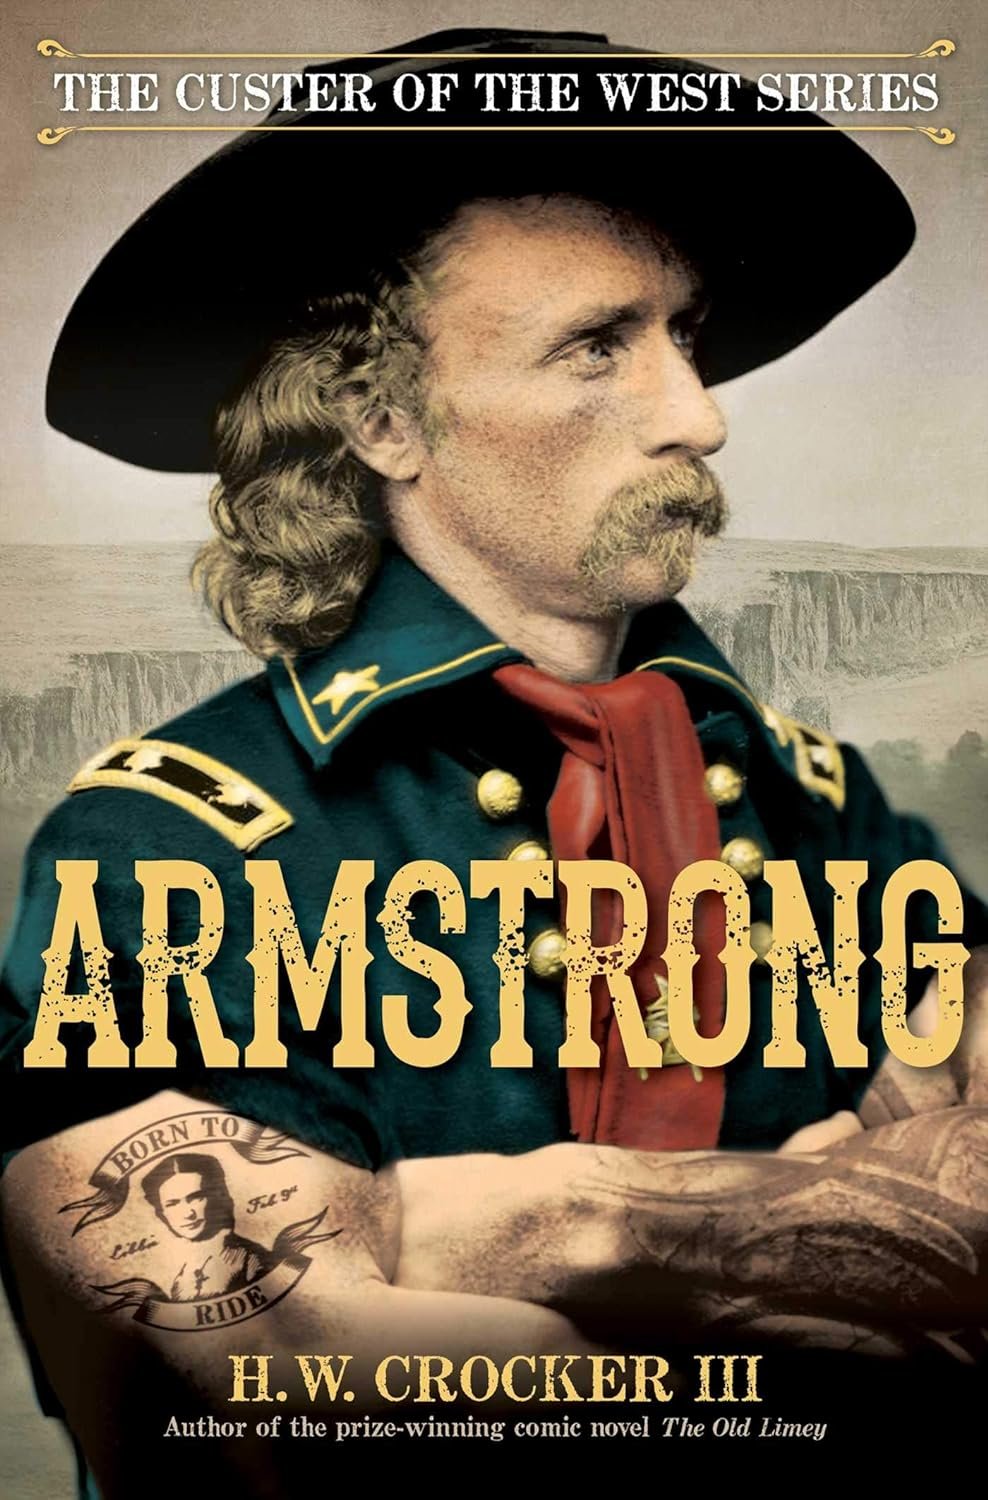 Armstrong (1) (Custer of the West Series)